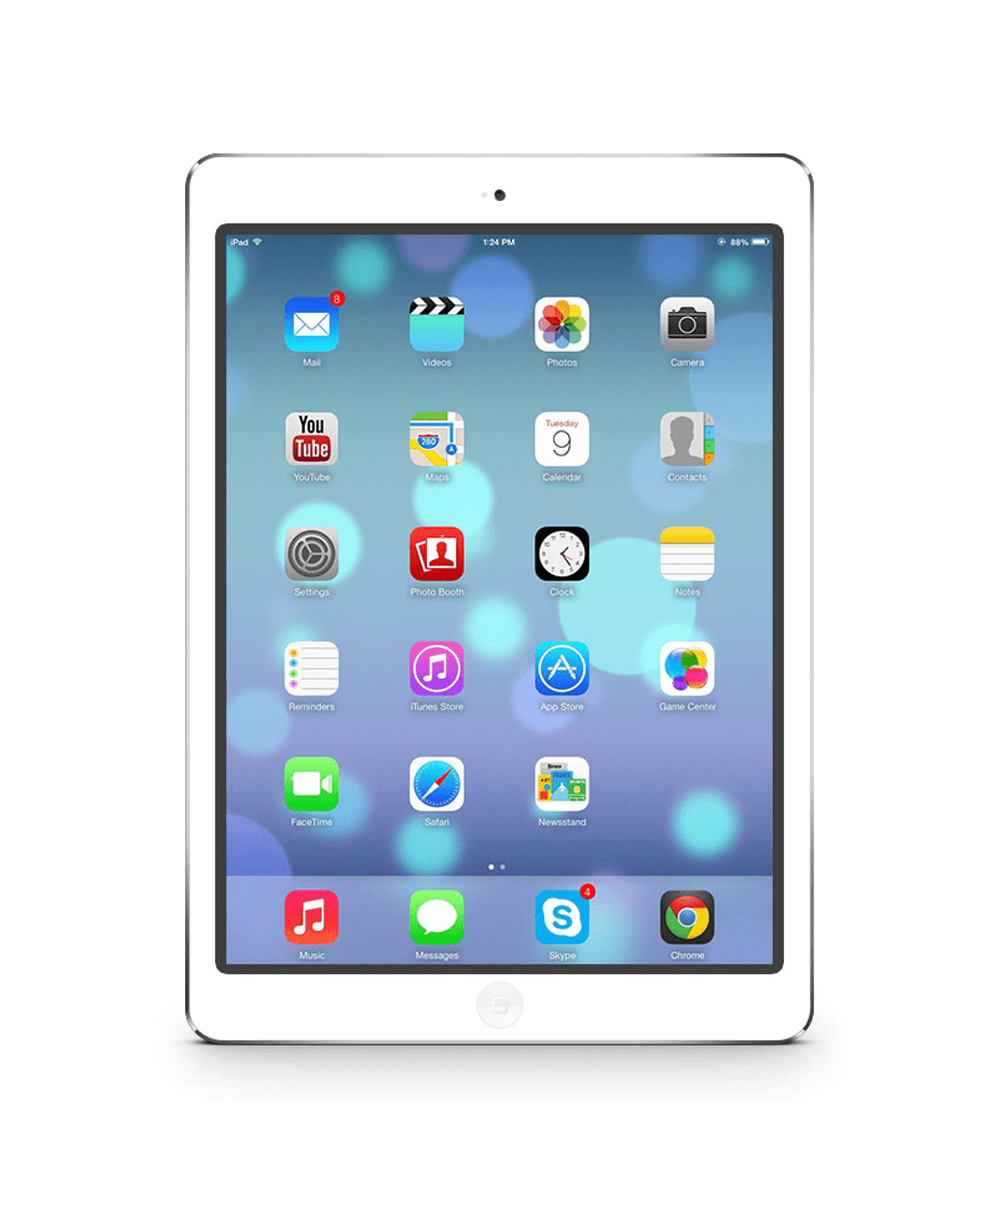 https://www.cell-tech.co.uk/wp-content/uploads/2017/05/ipad-air.png